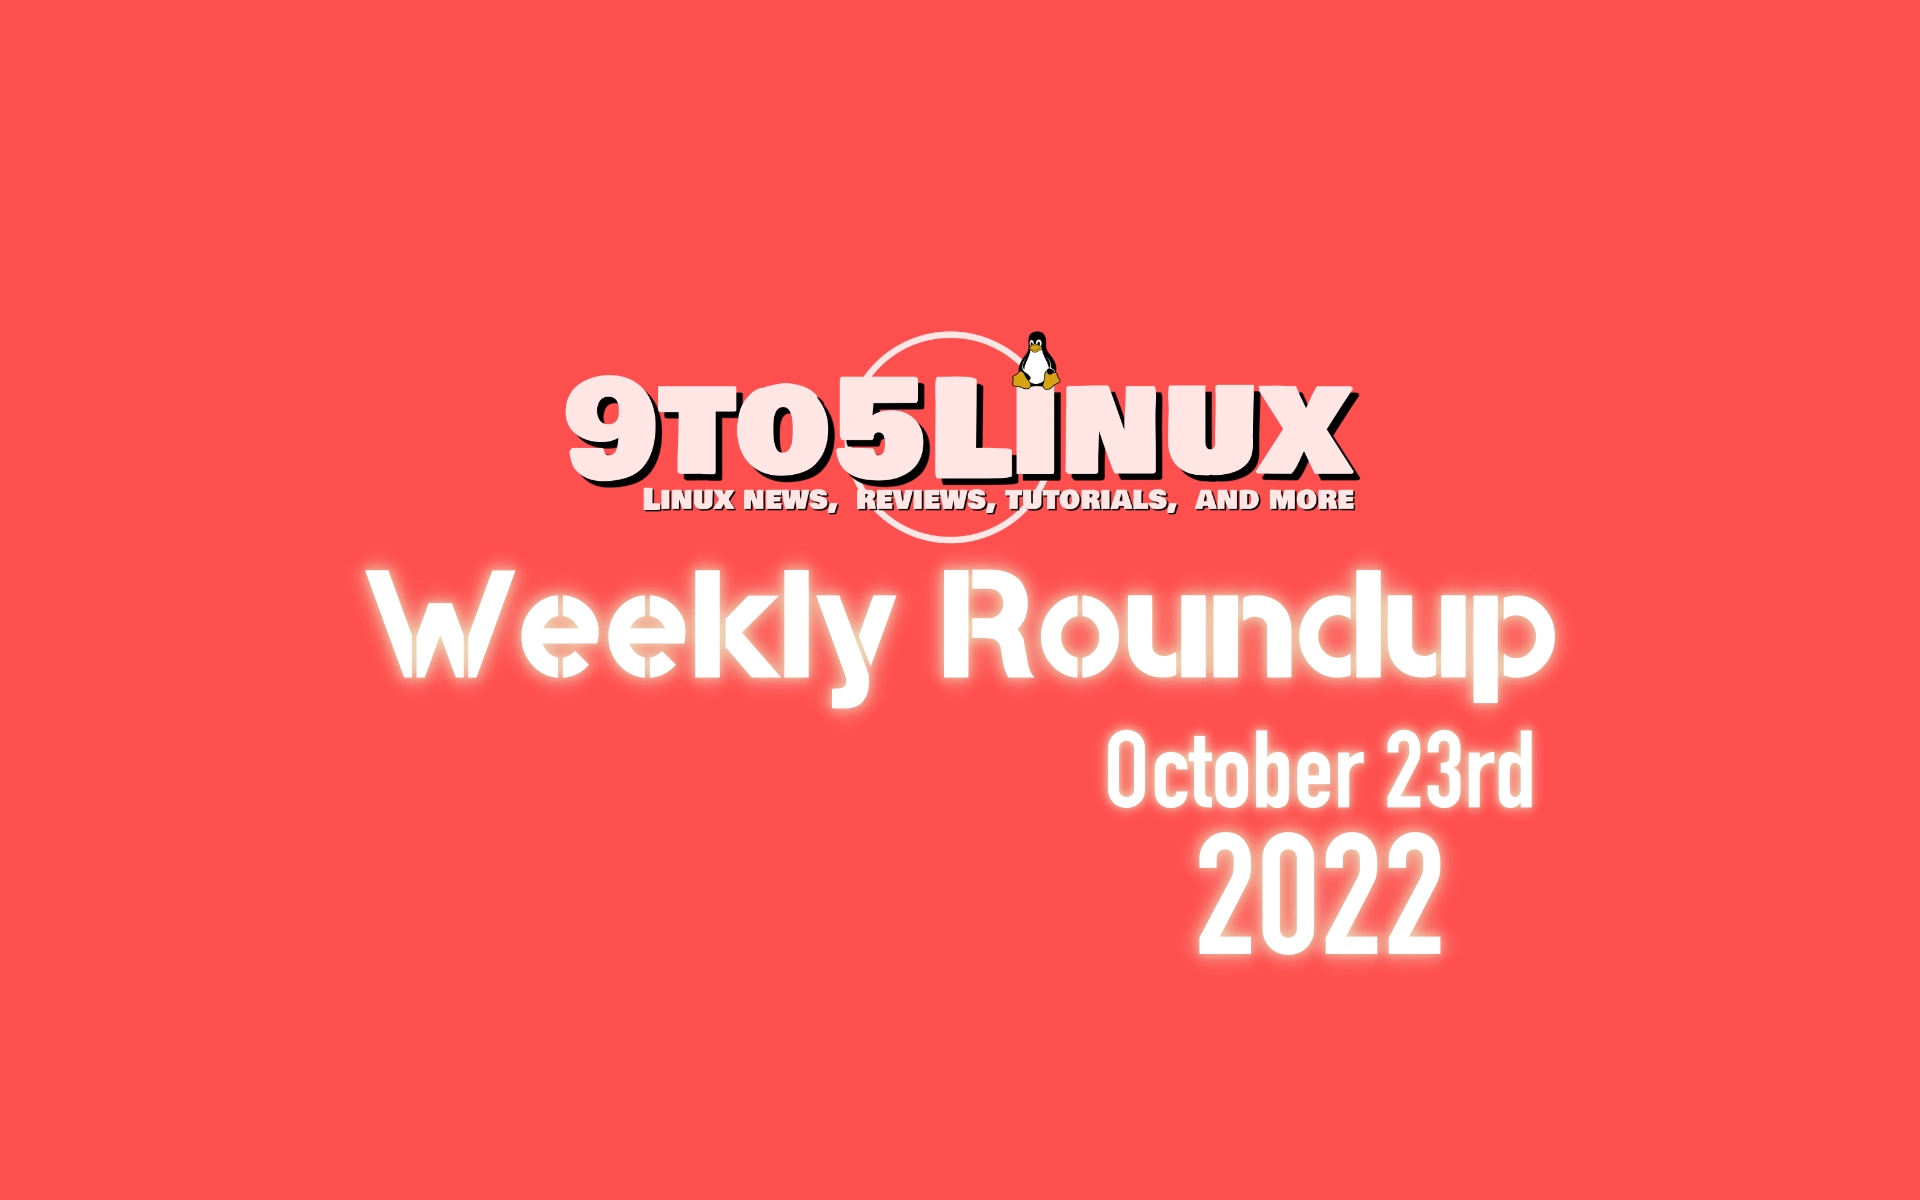 9to5Linux Weekly Roundup: October 23rd, 2022